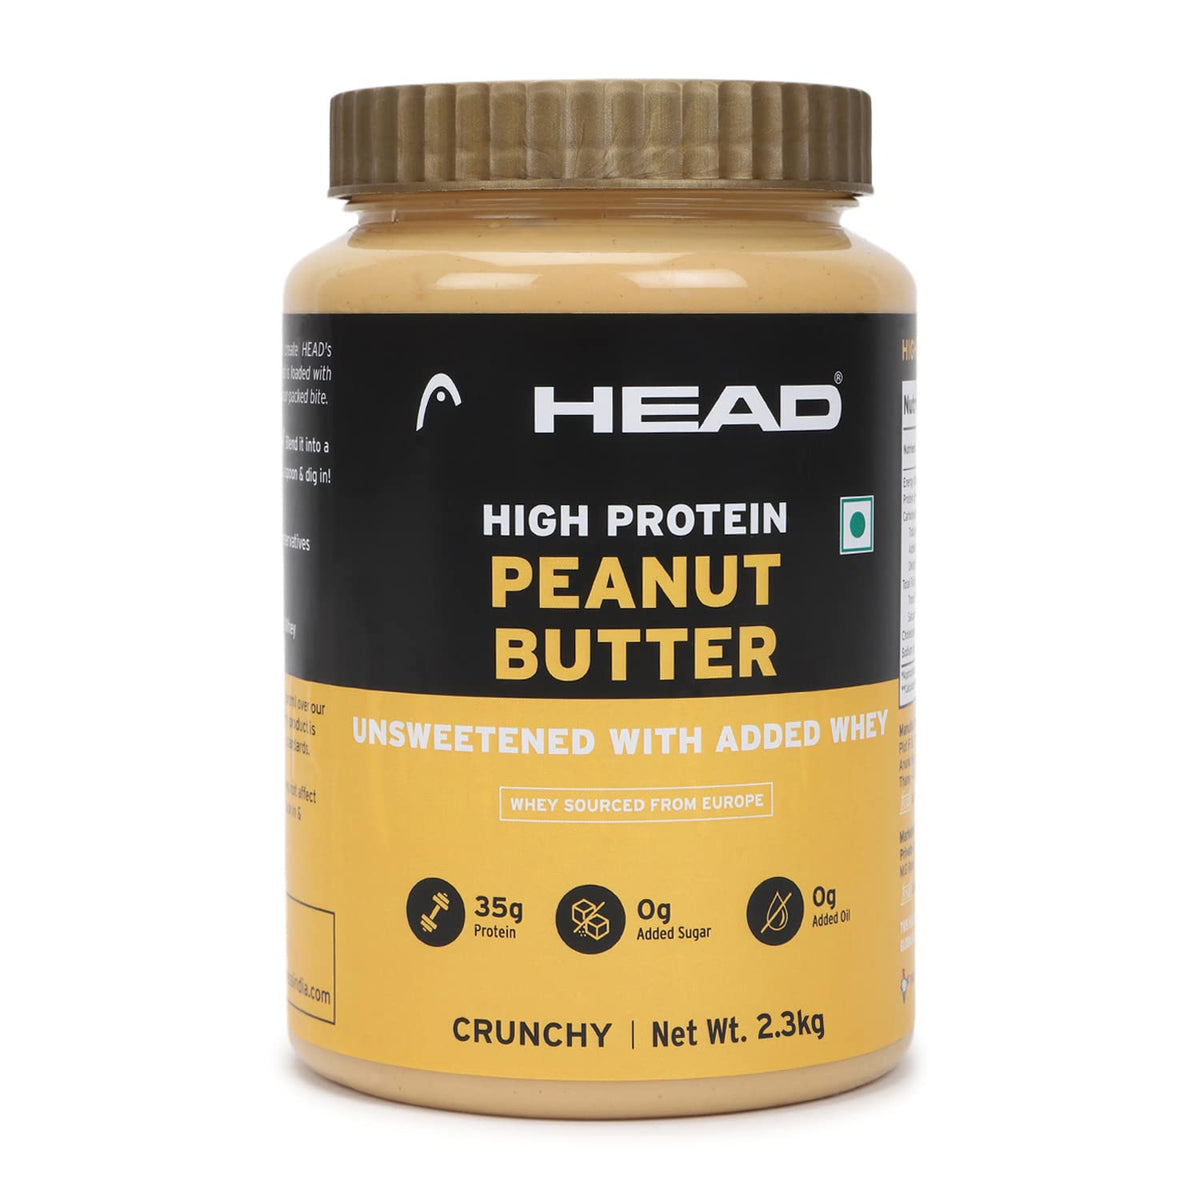 Head High Protein Peanut Butter (Unsweetened, Crunchy, 2.3Kg) | 100% Pure Nuts | Added Whey | Protein Rich Nutritious Snack